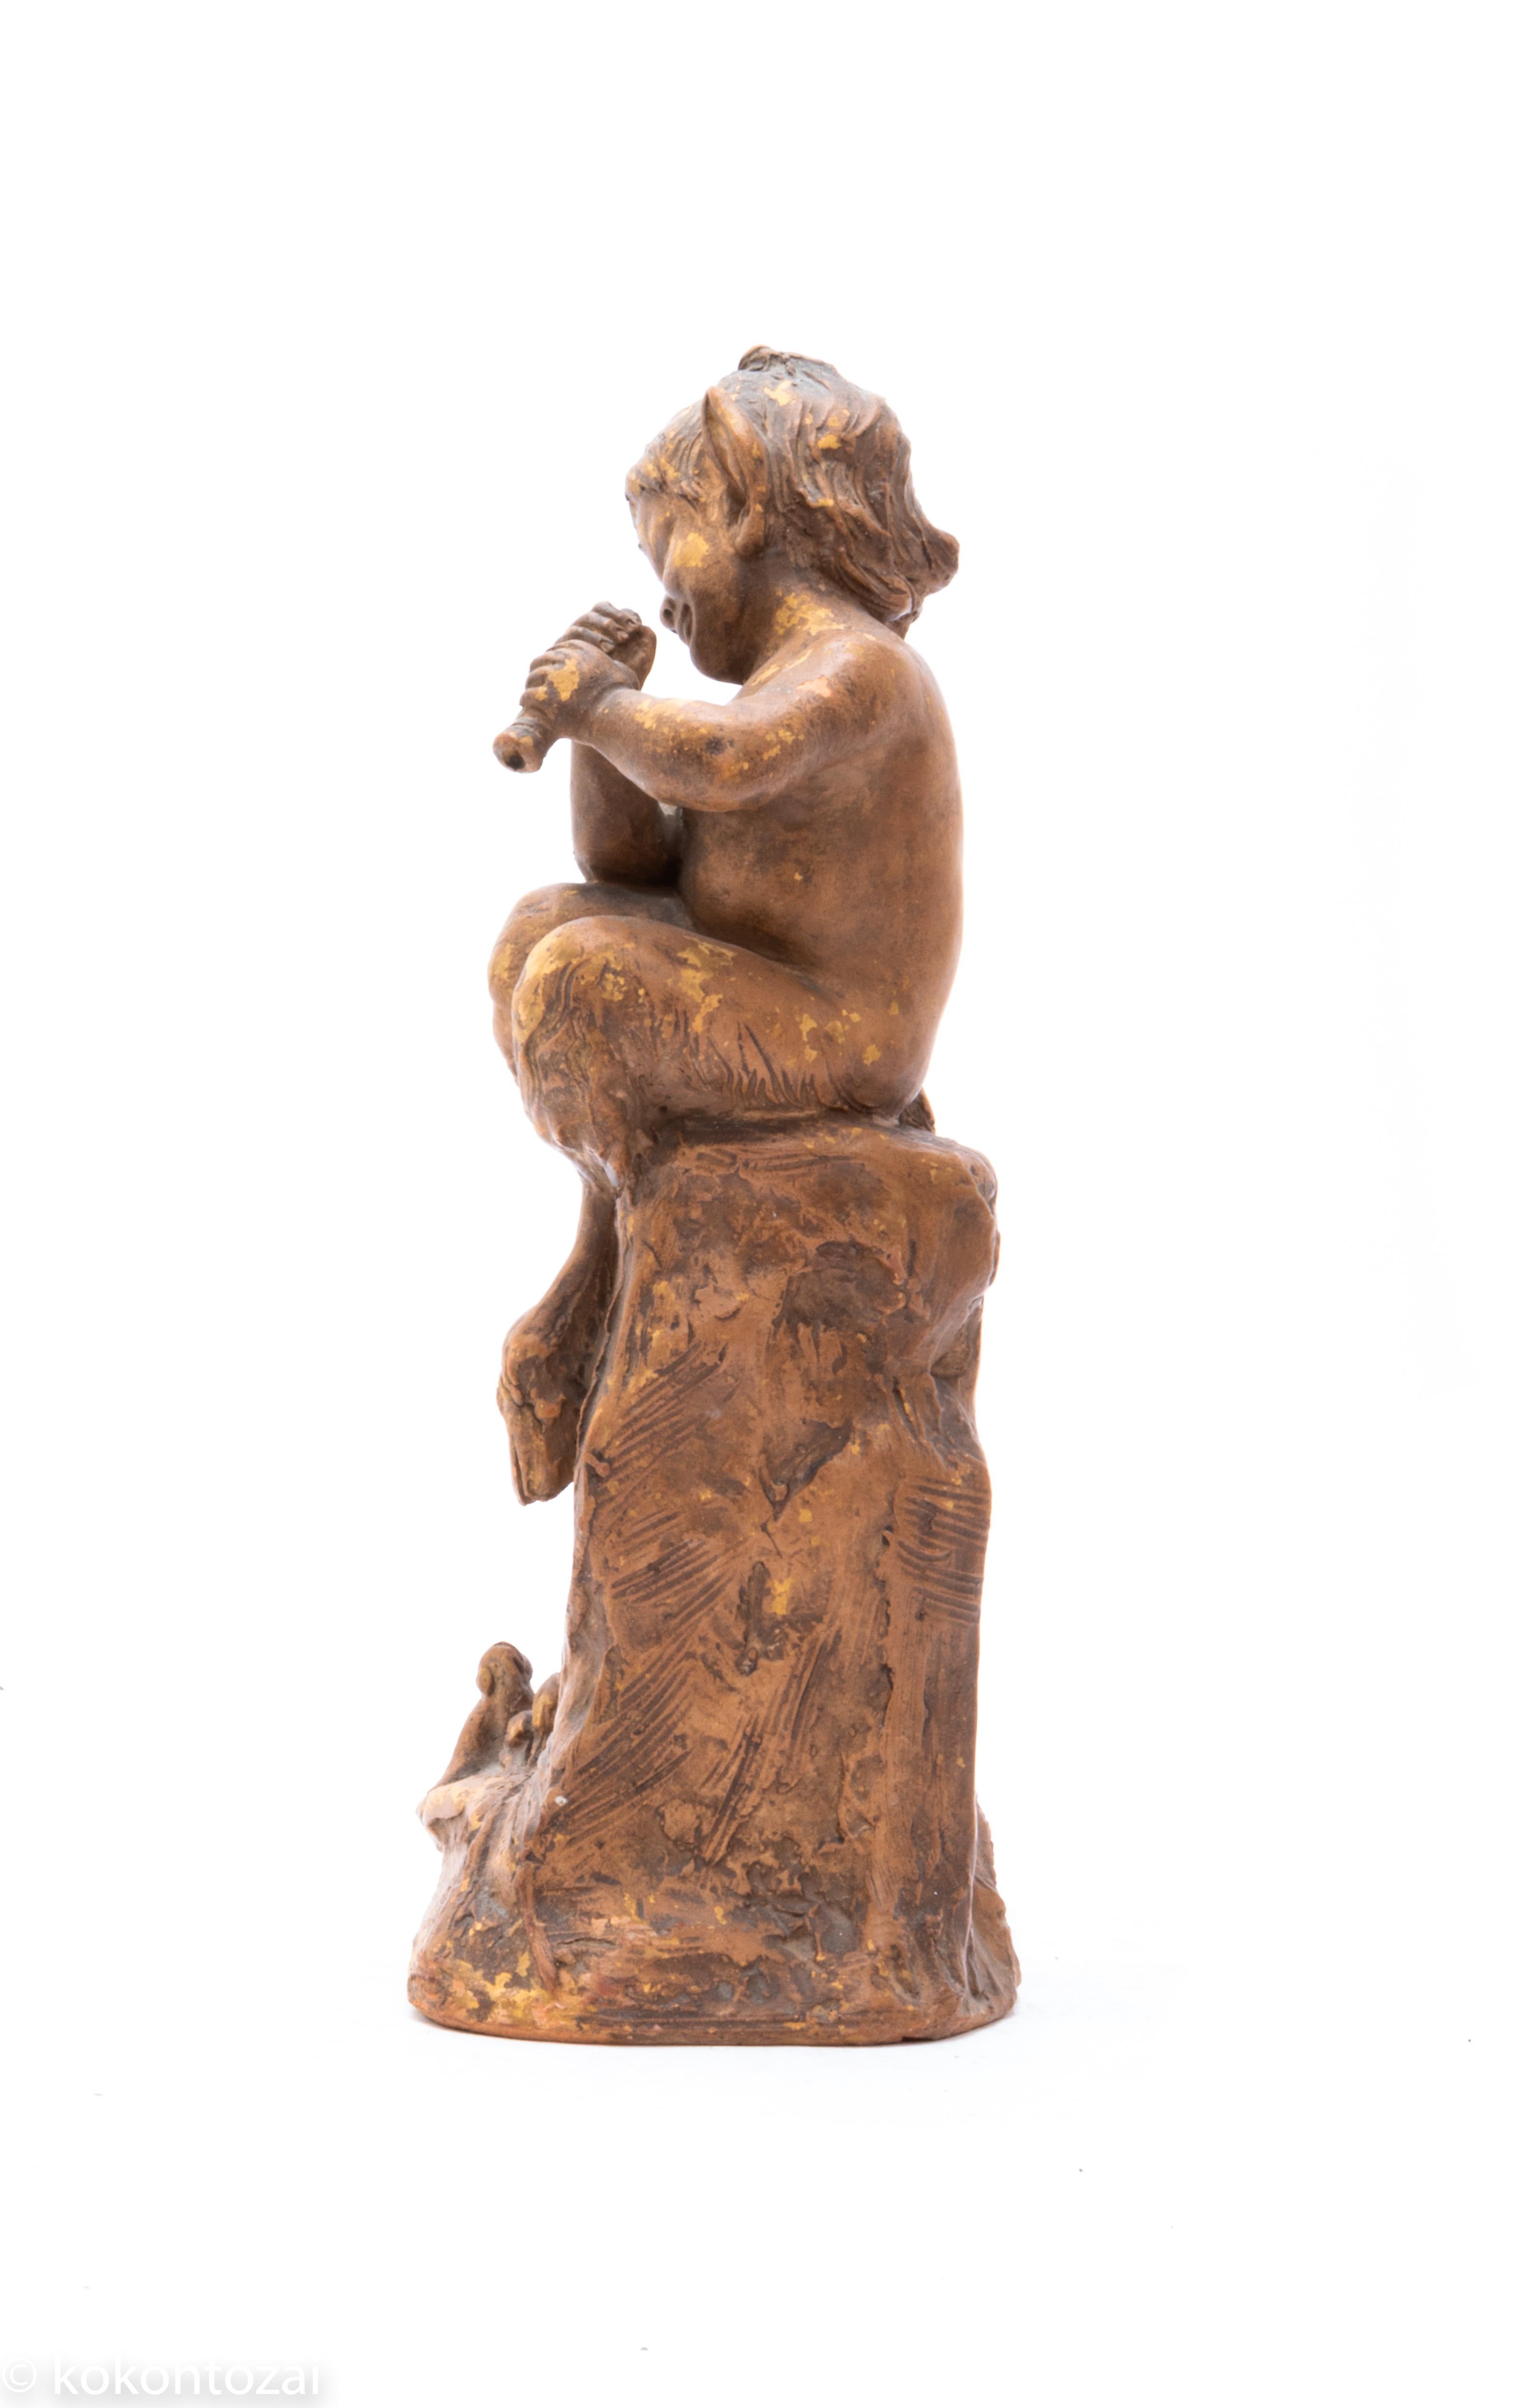 French Faun sculpture made in terracotta, and signed by 